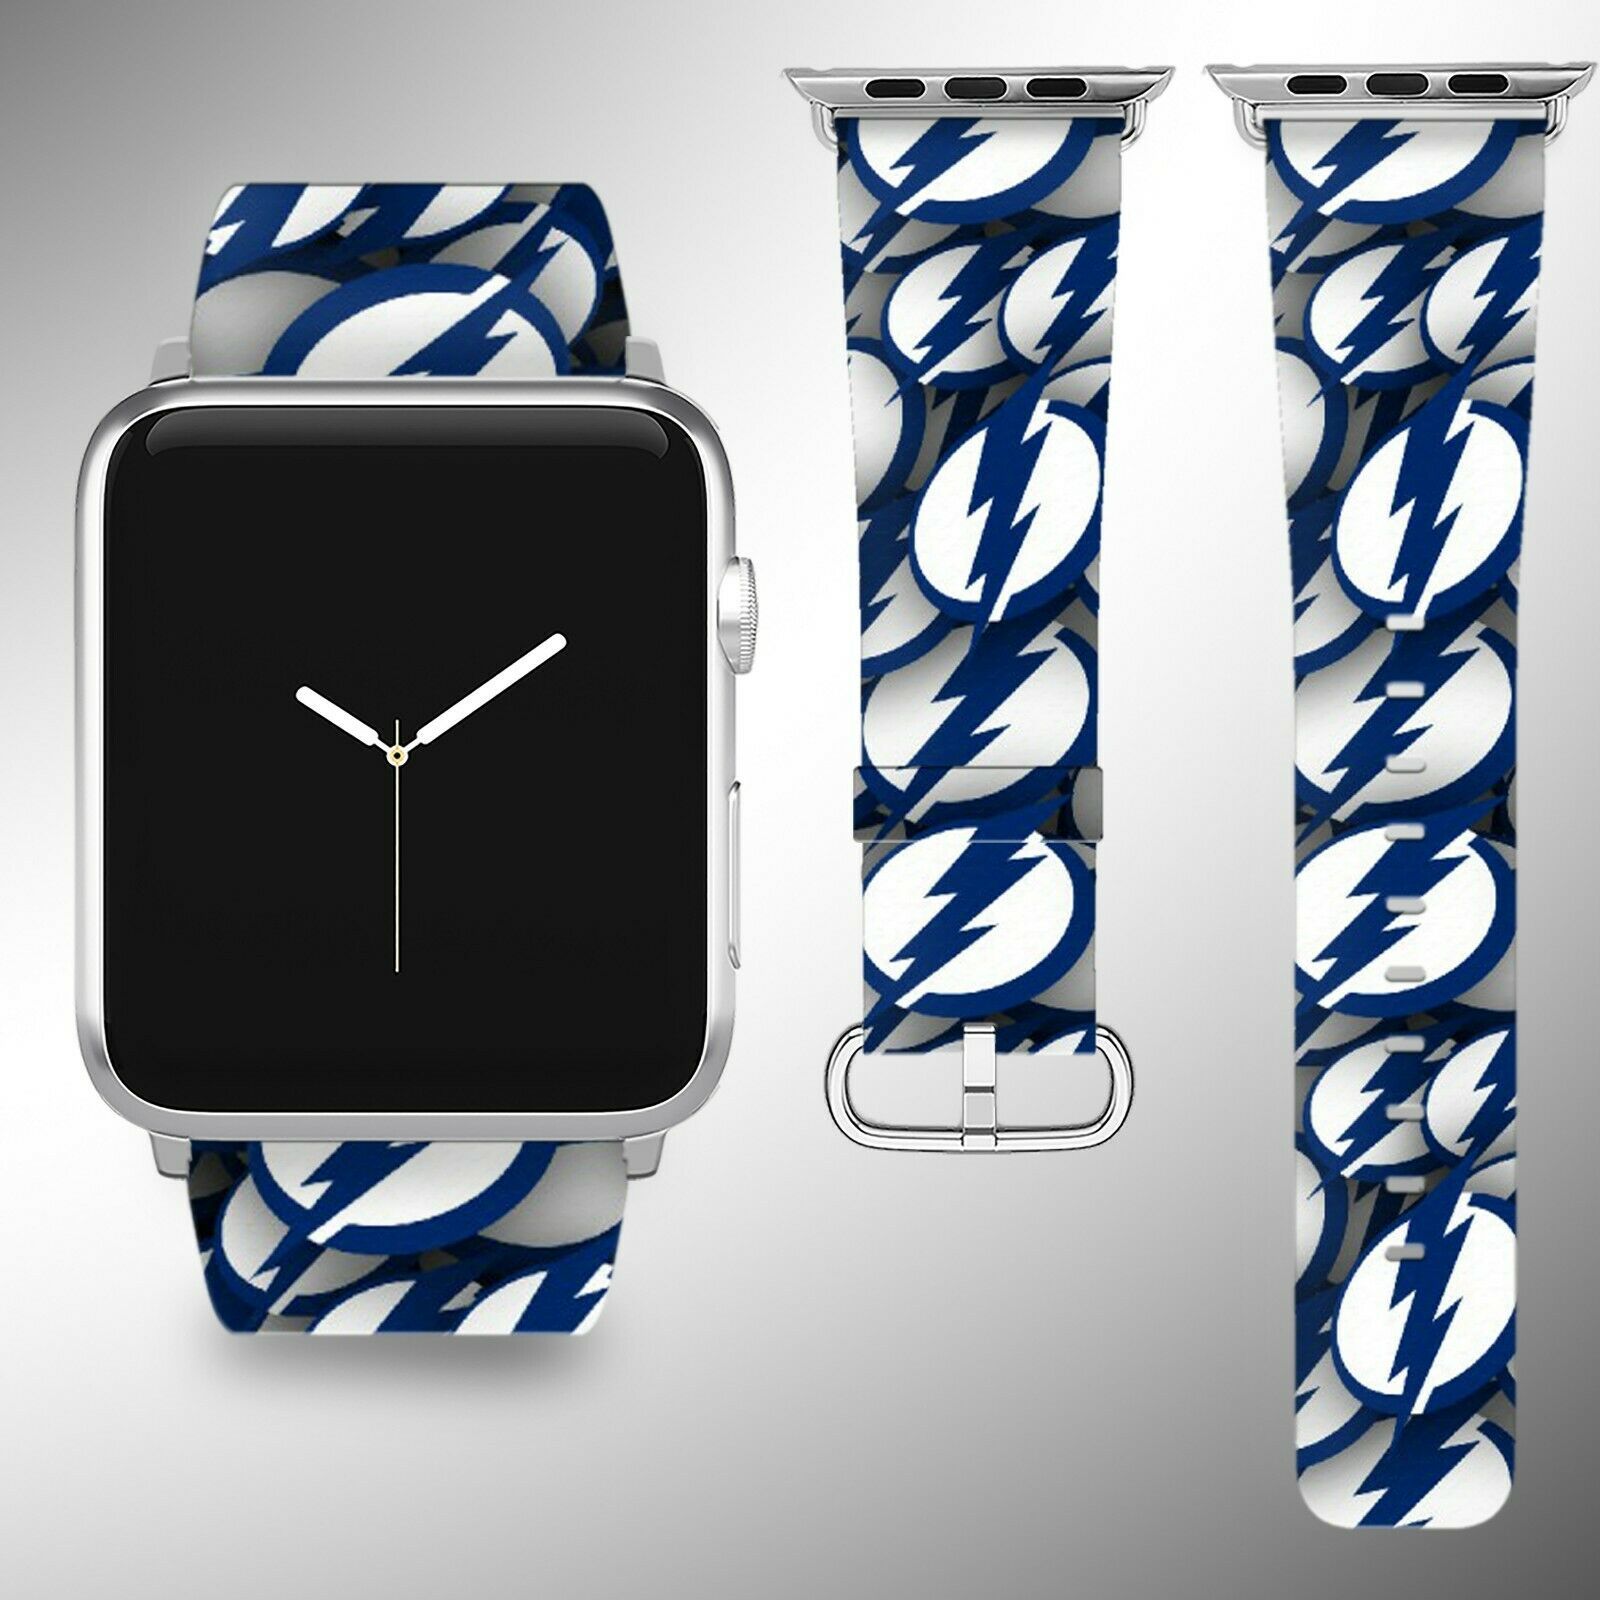 Tampa Bay Lightning Apple Watch Band 38 40 42 44 mm Fabric Leather